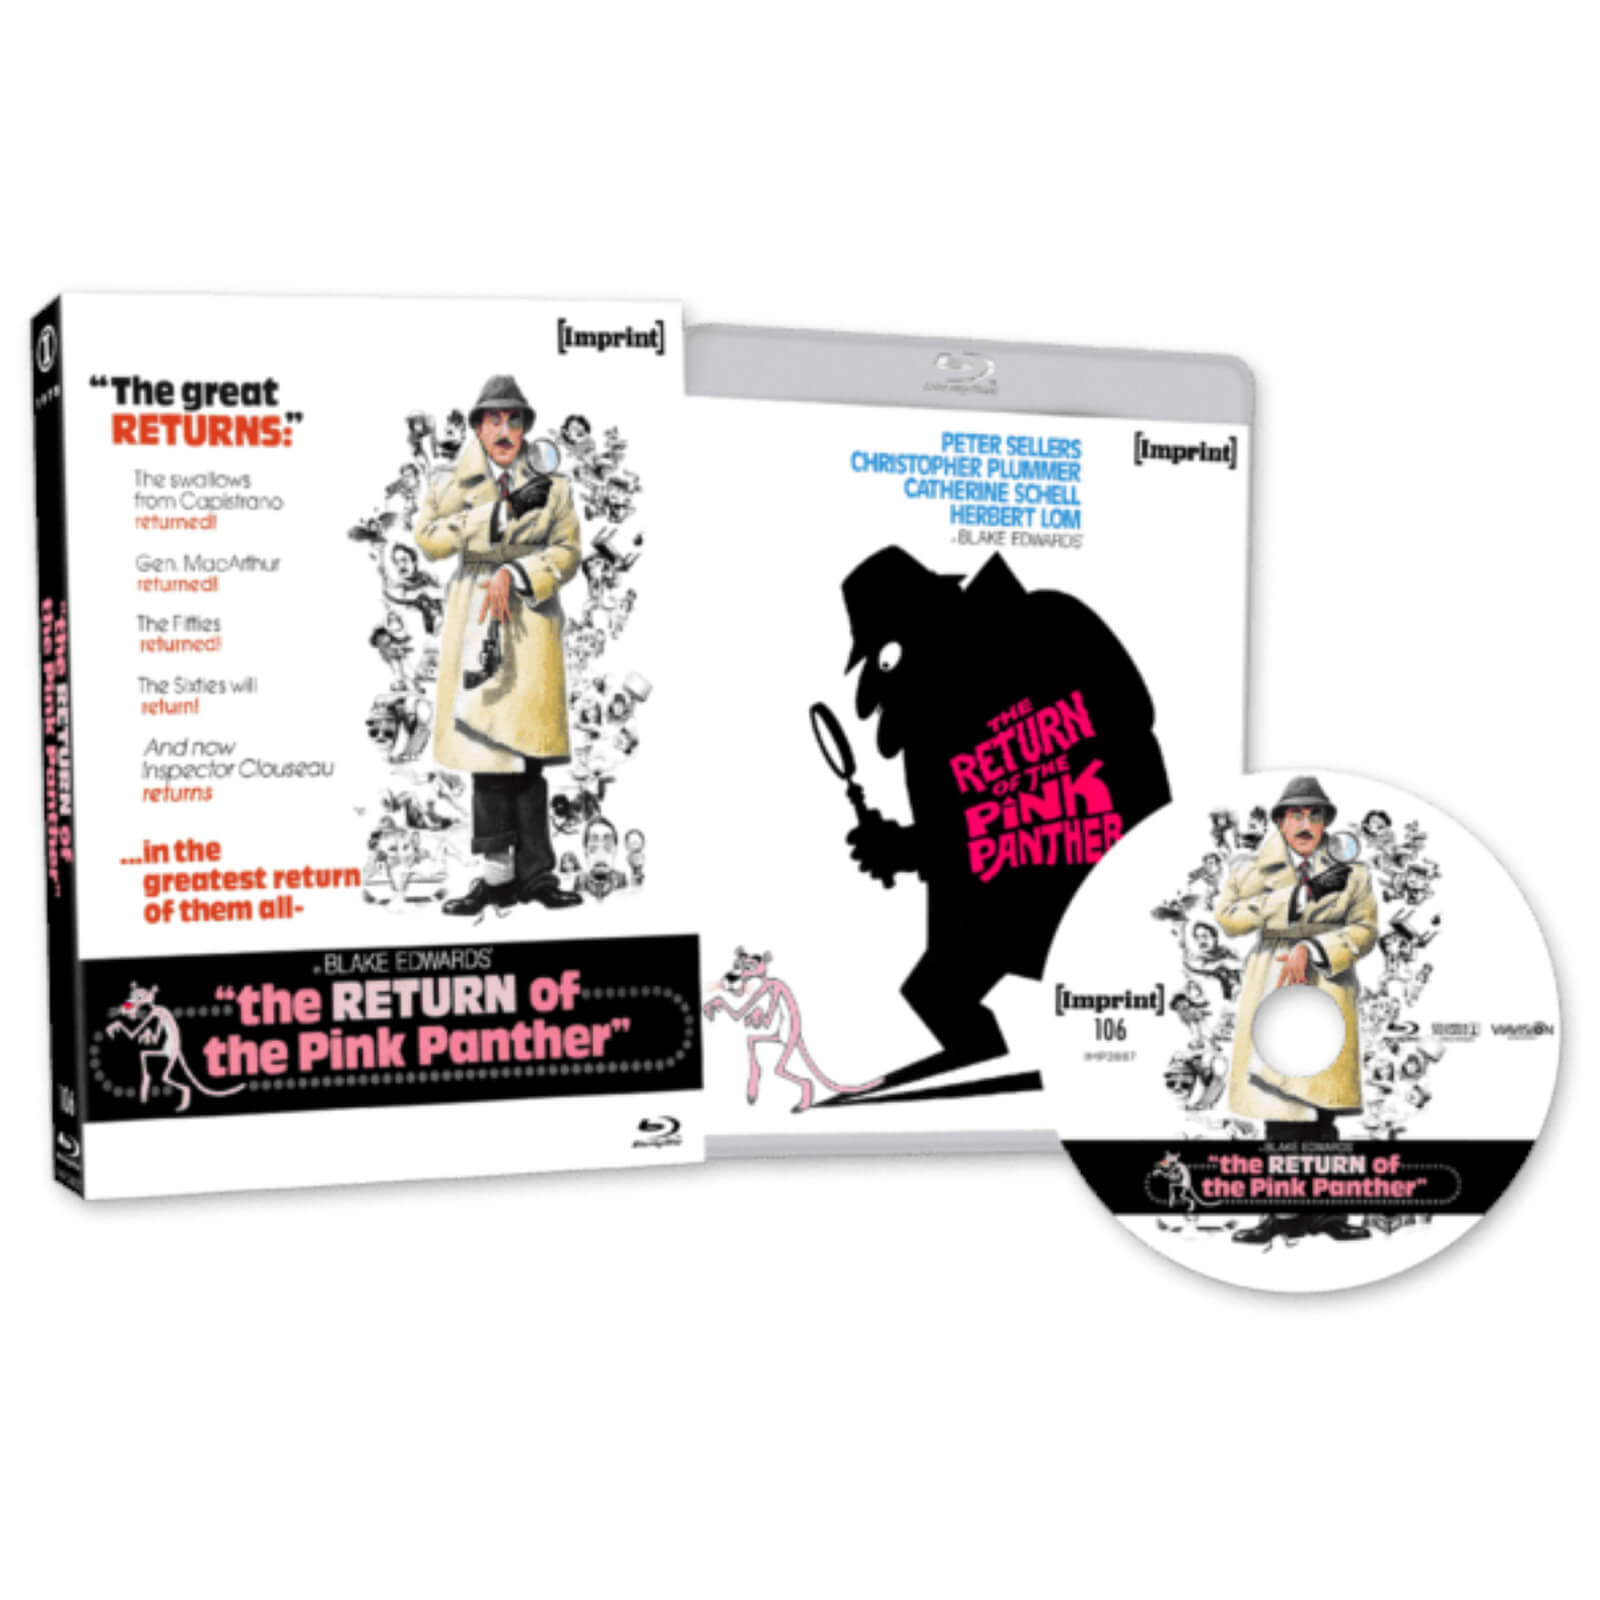 The Return of the Pink Panther - Imprint Collection (US Import)